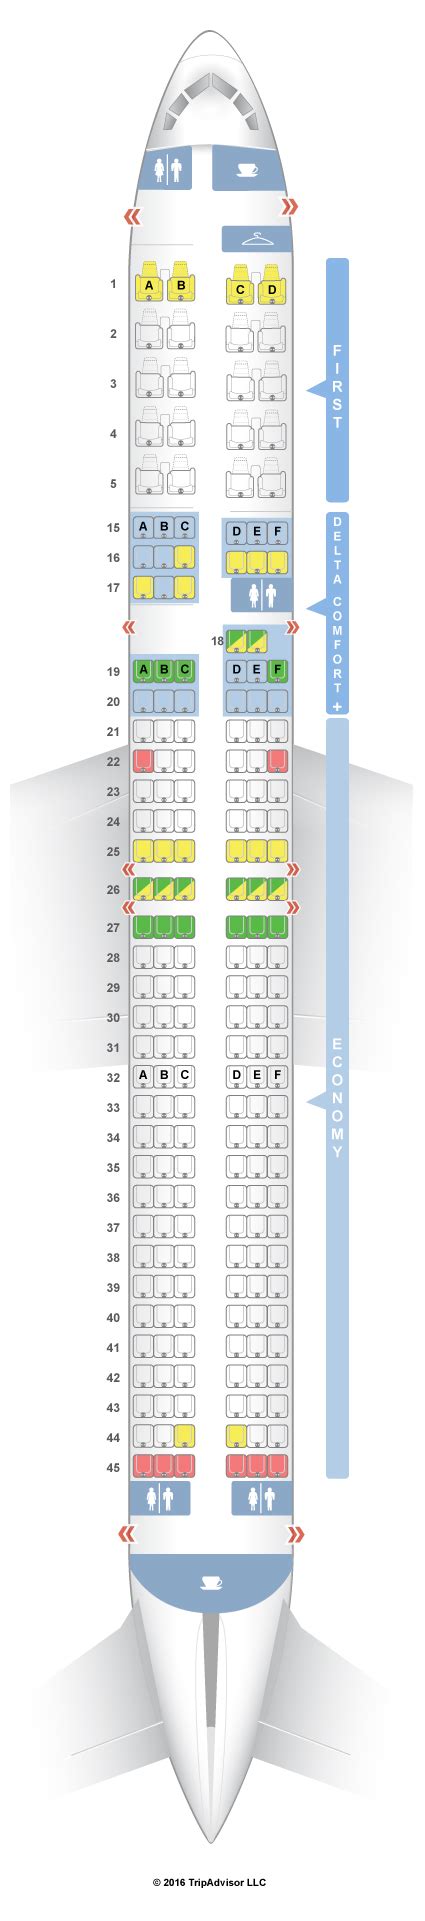 Seatguru 757 delta. For your next Delta flight, use this seating chart to get the most comfortable seats, legroom, and recline on . Delta Boeing 757-200 (75G) Note: There are 5 versions of this aircraft. Seat Map; Info; Photos; Click any seat for more information. Key ... 